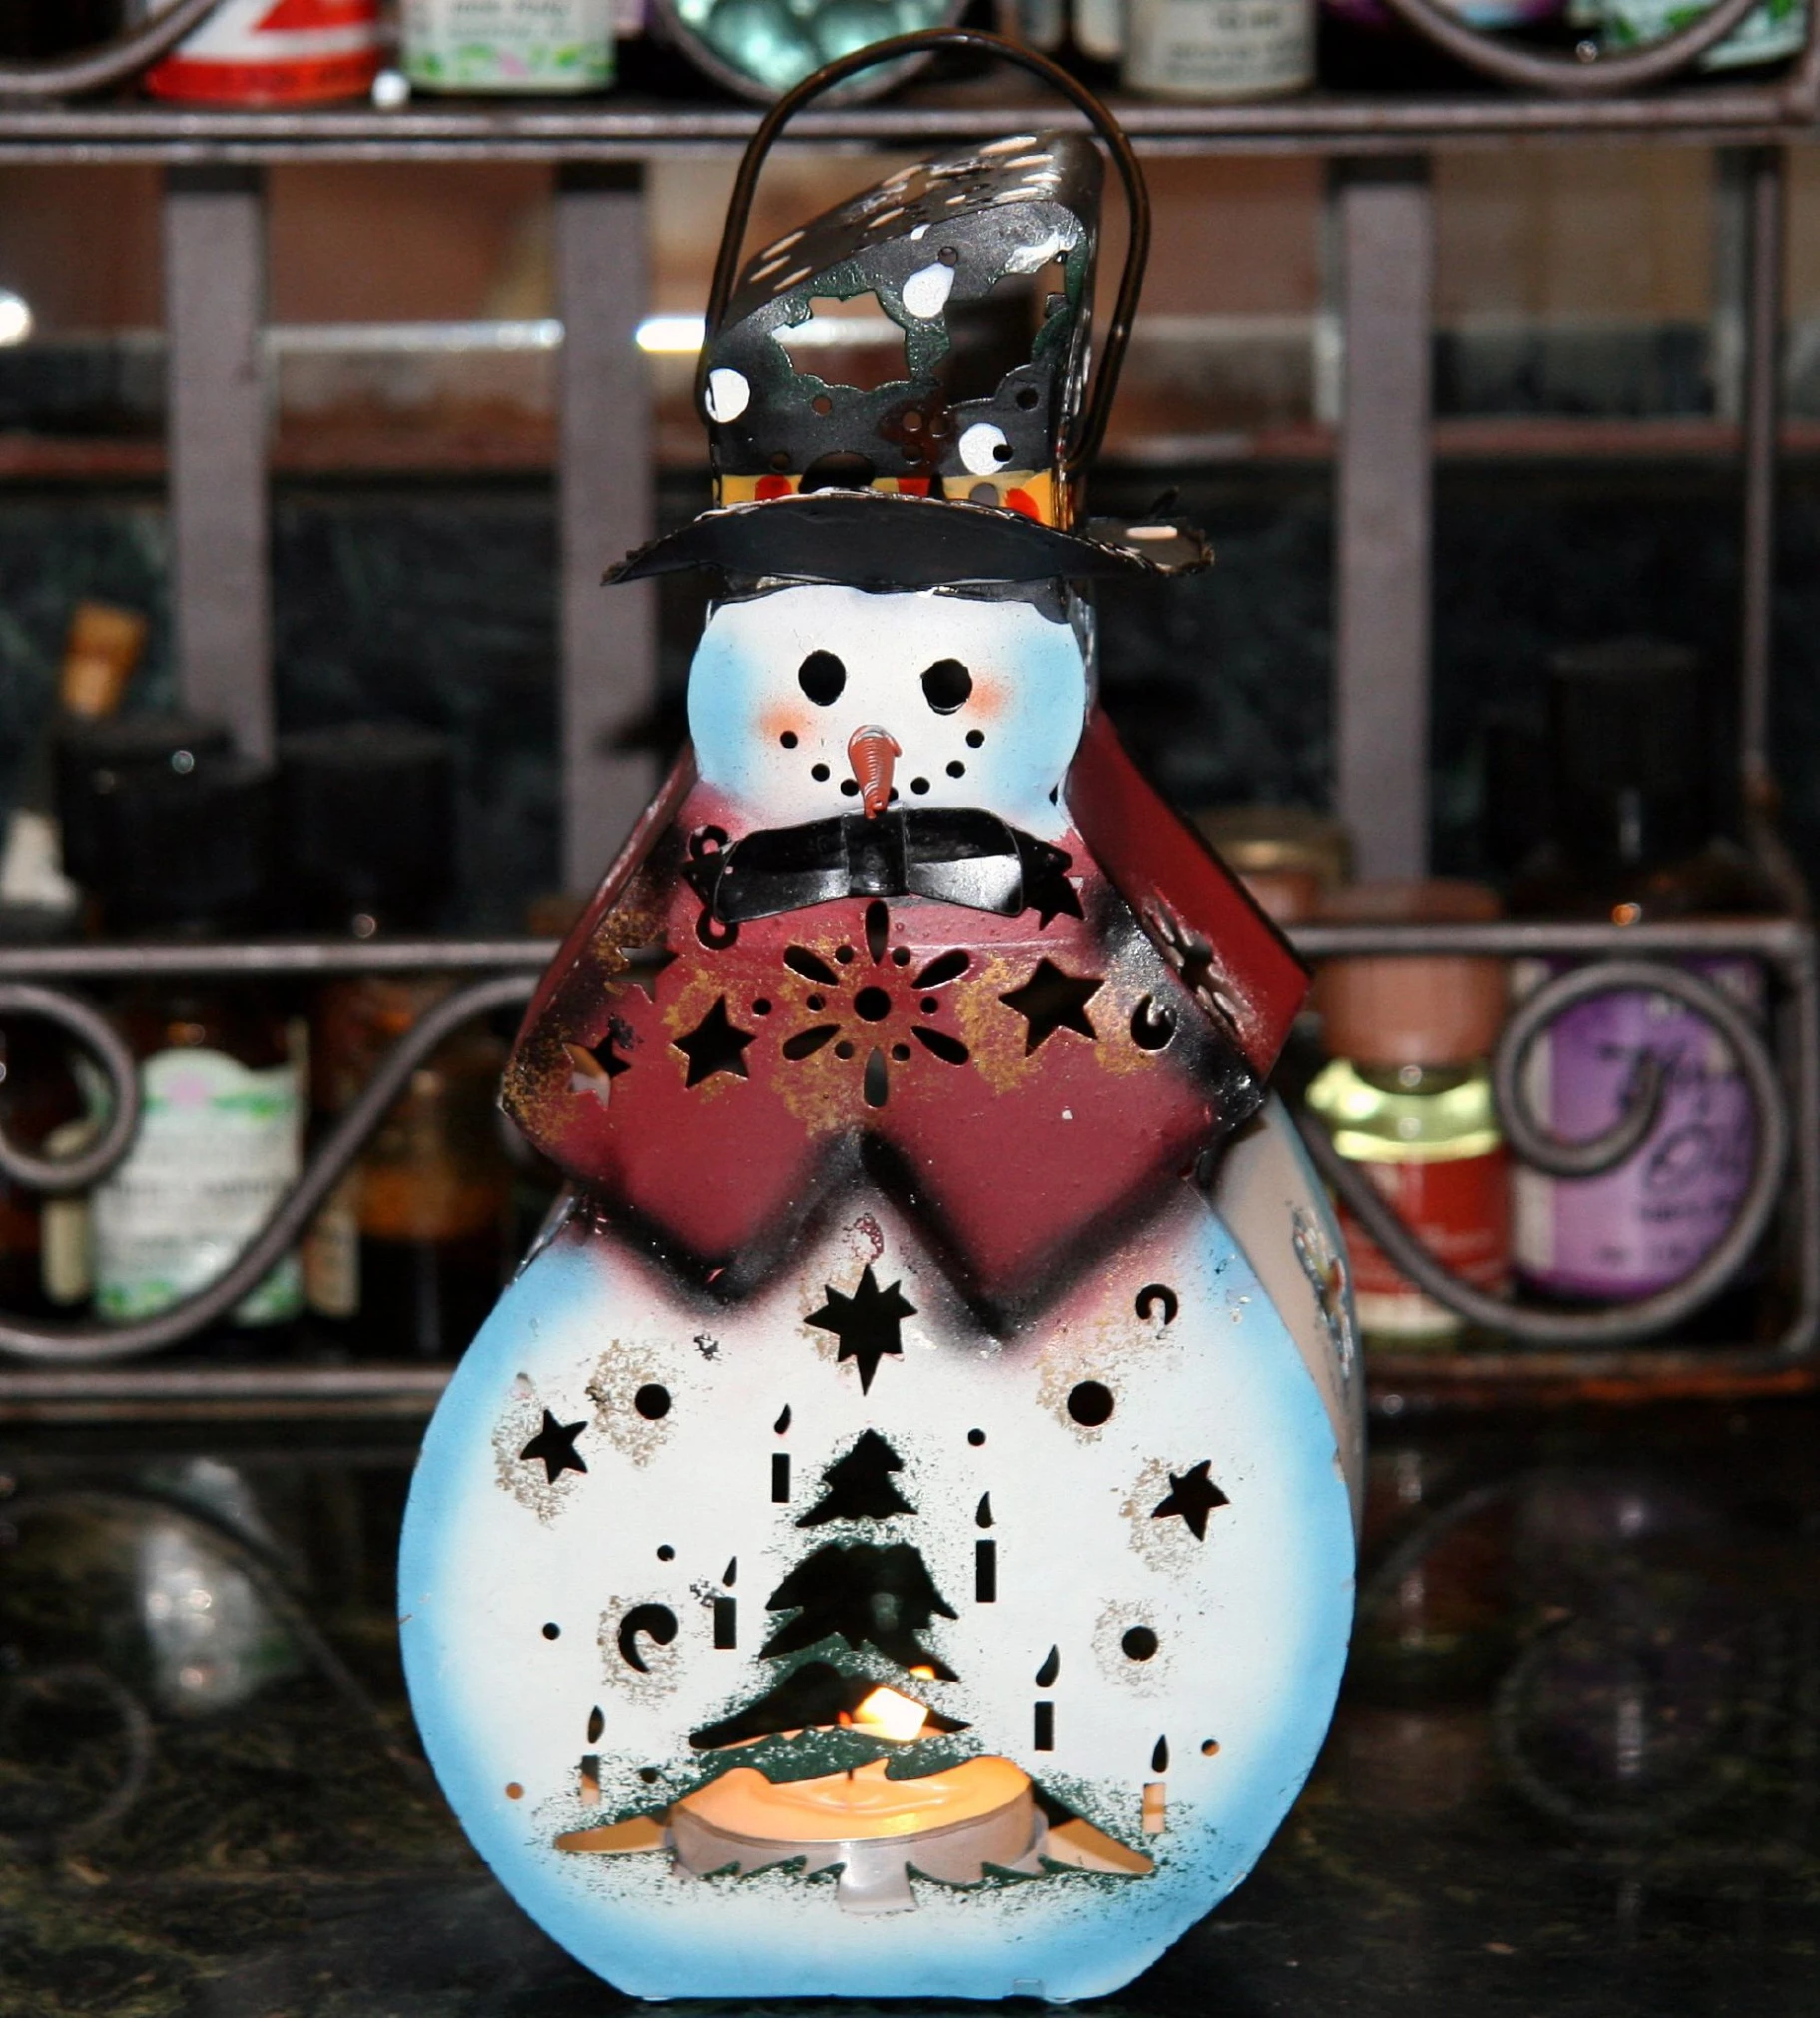 a snowman statue on top of a table with lights